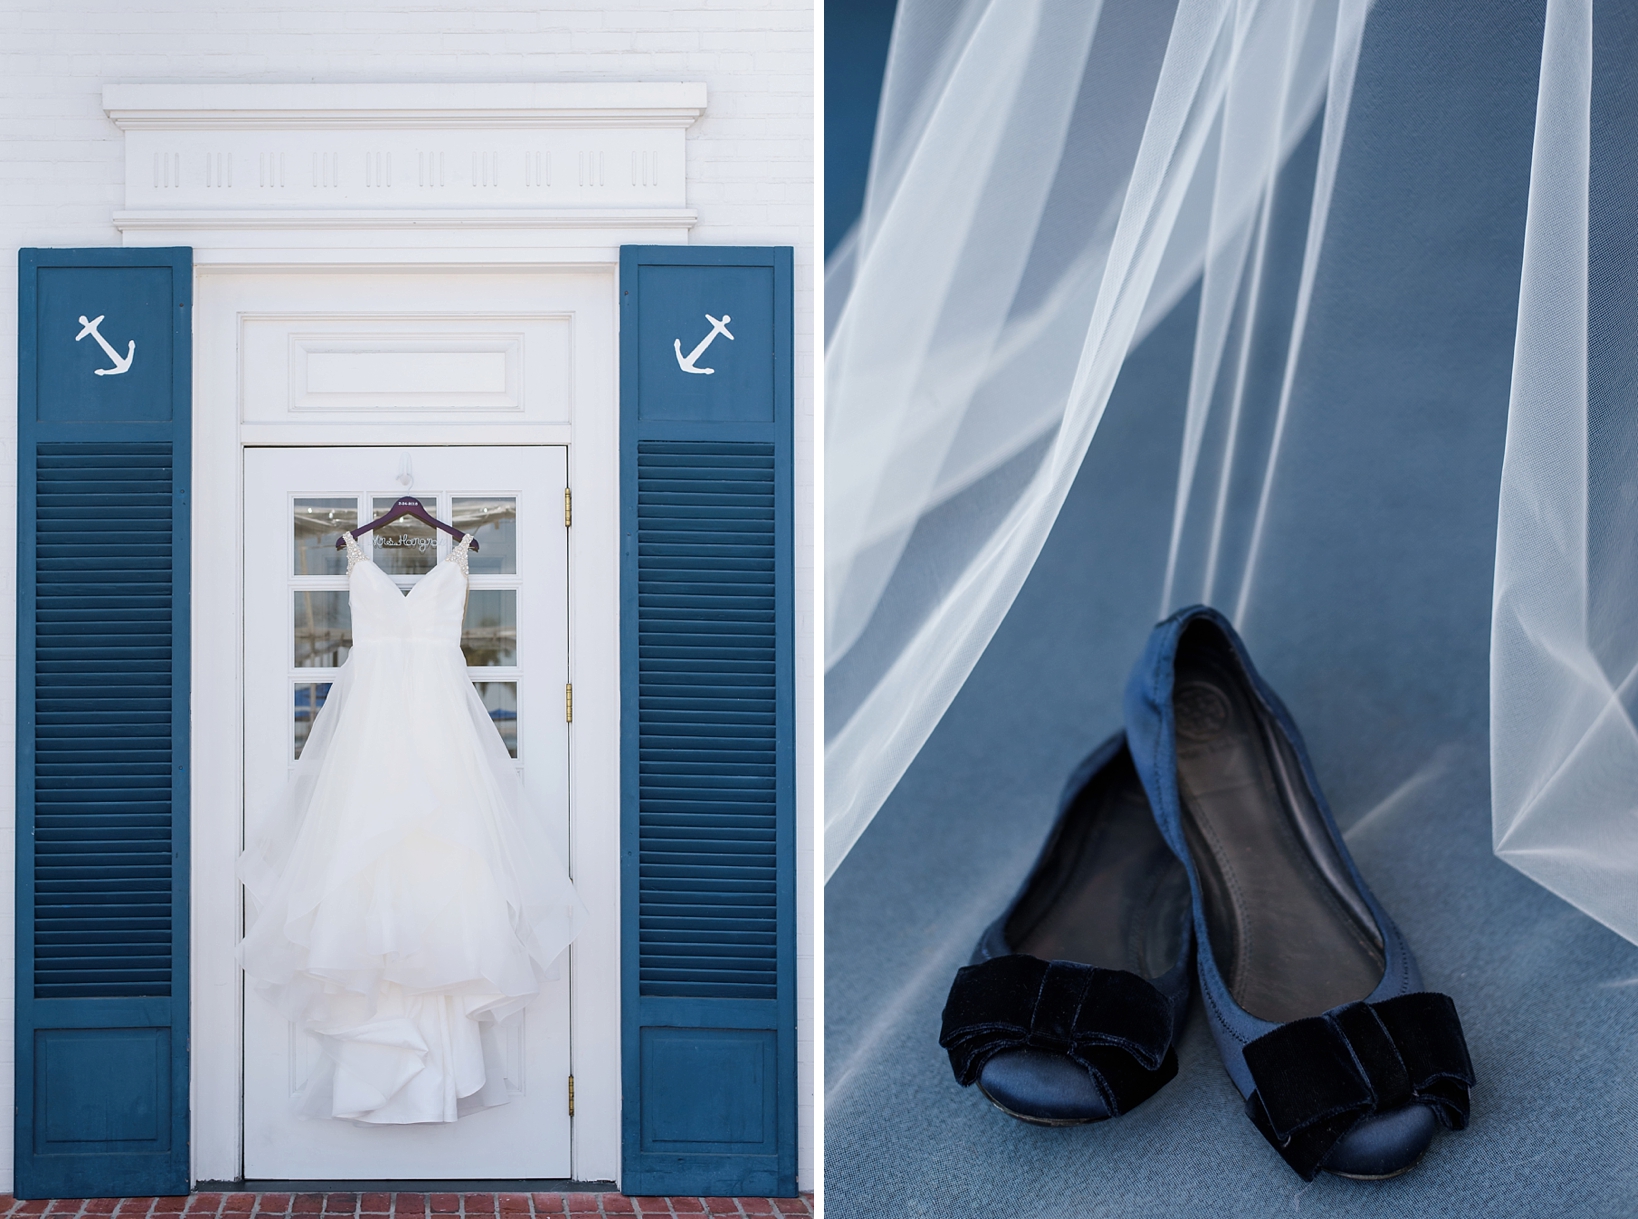 The wedding gown hanging against a nautical themed shutter and the bride's bow covered velvet flats